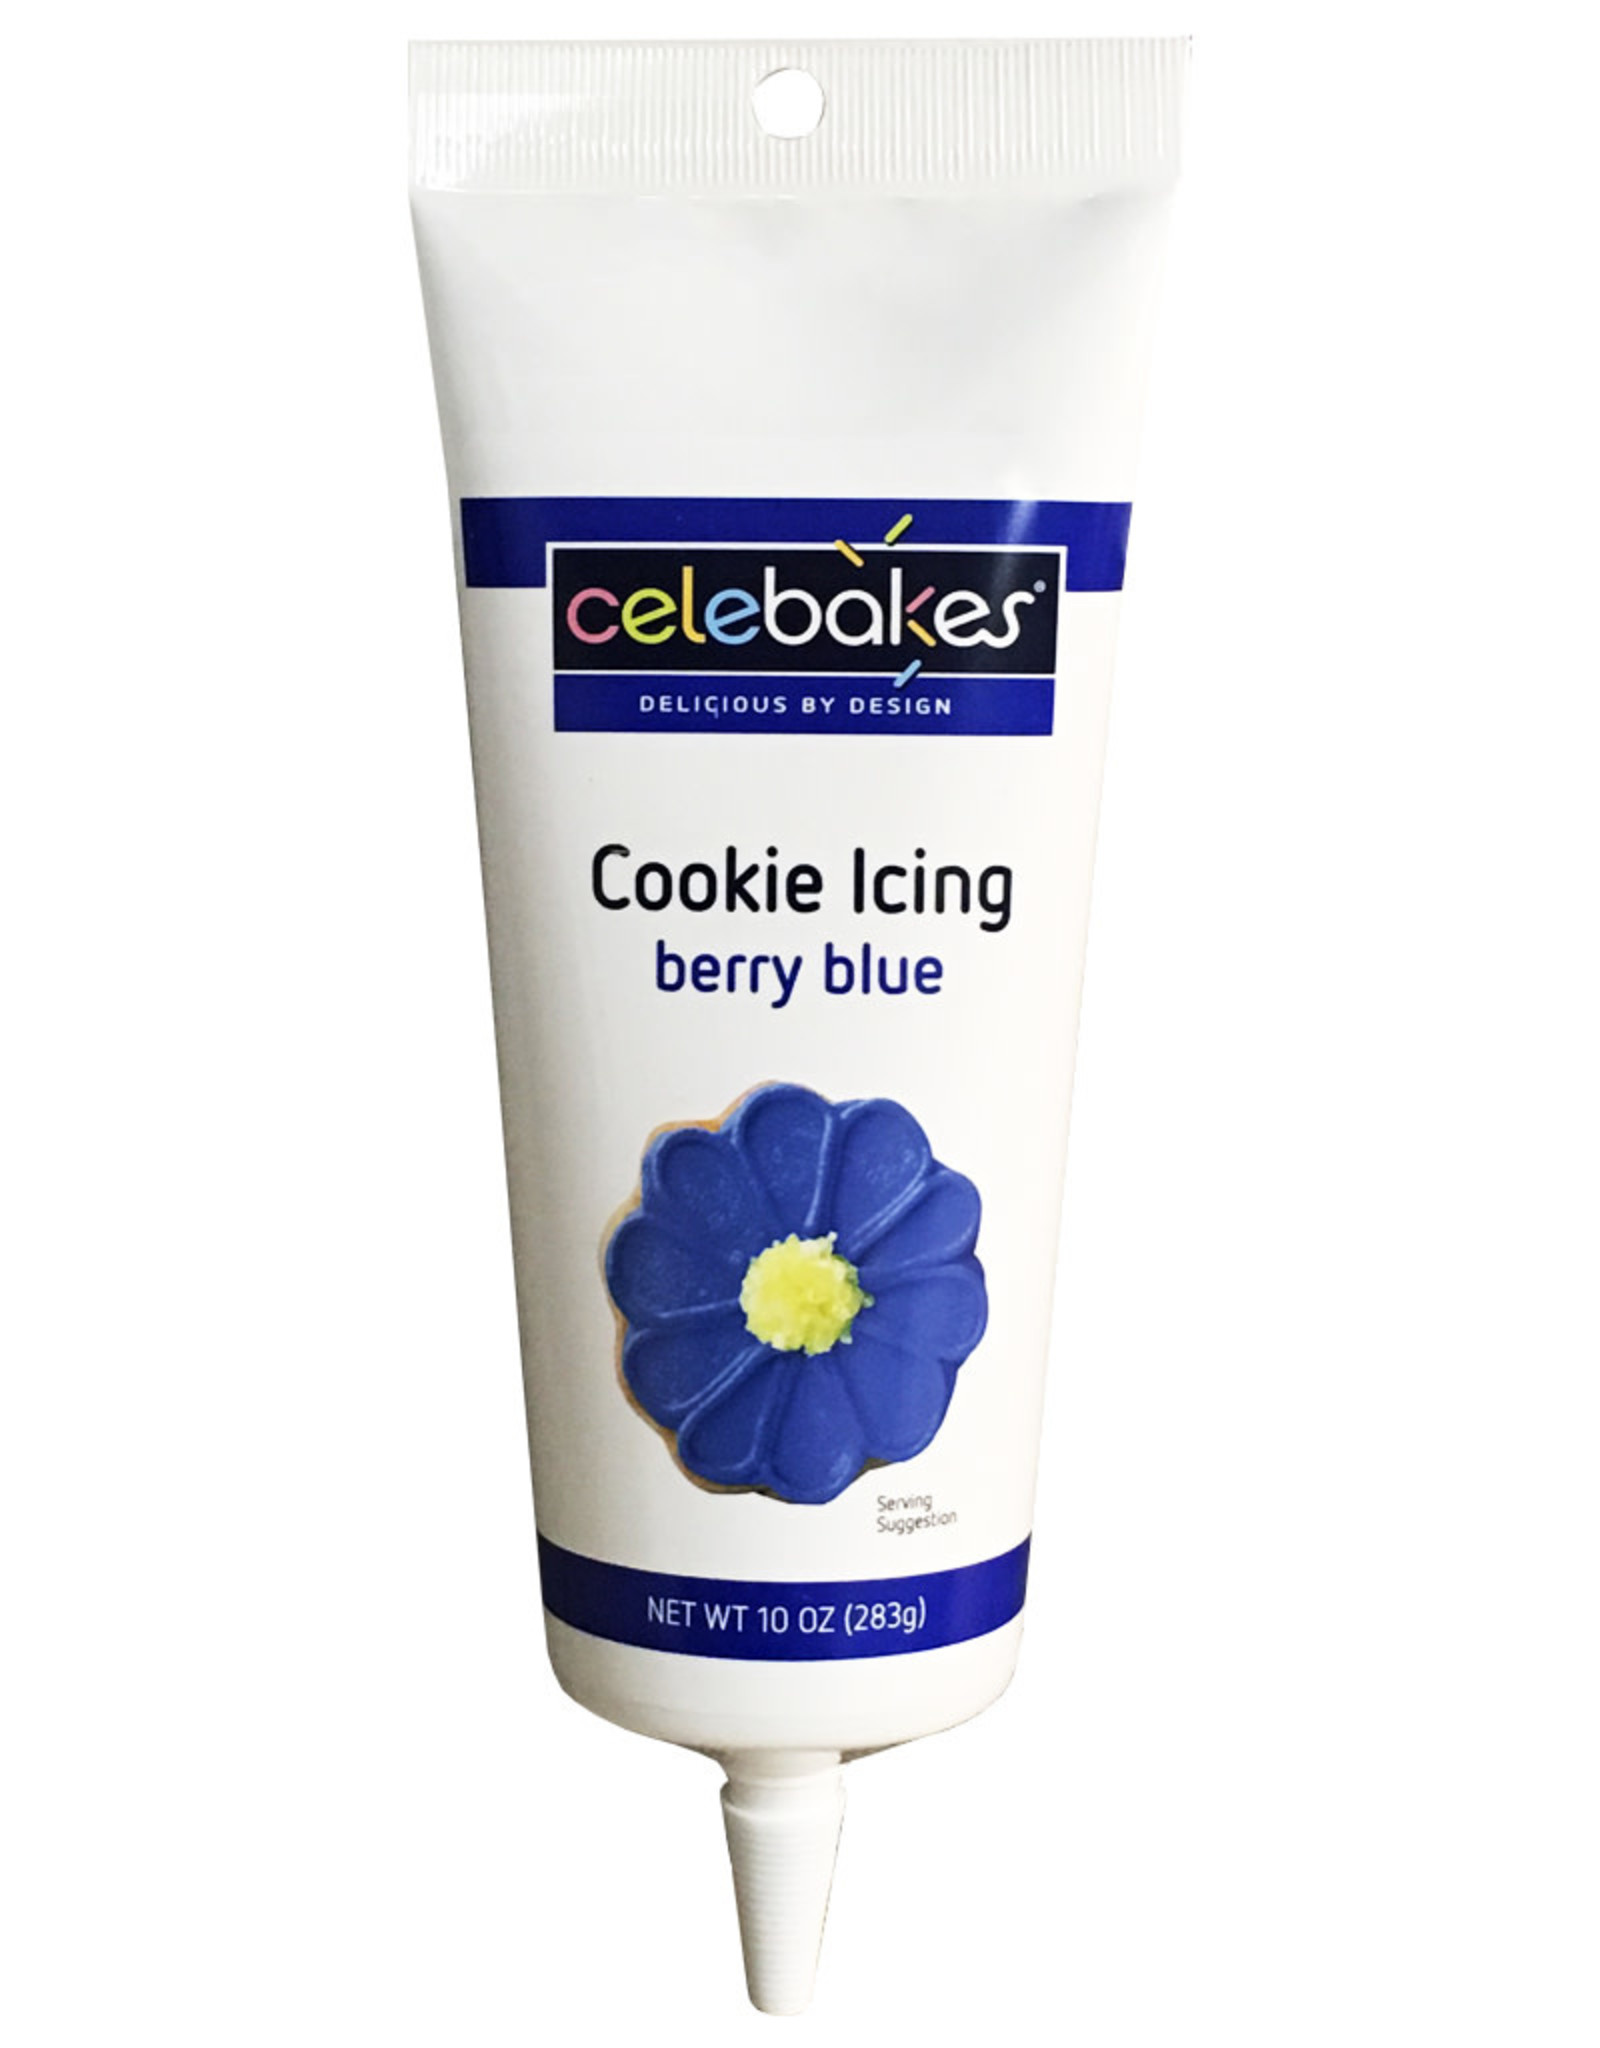 Celebakes Cookie Icing (Berry Blue)